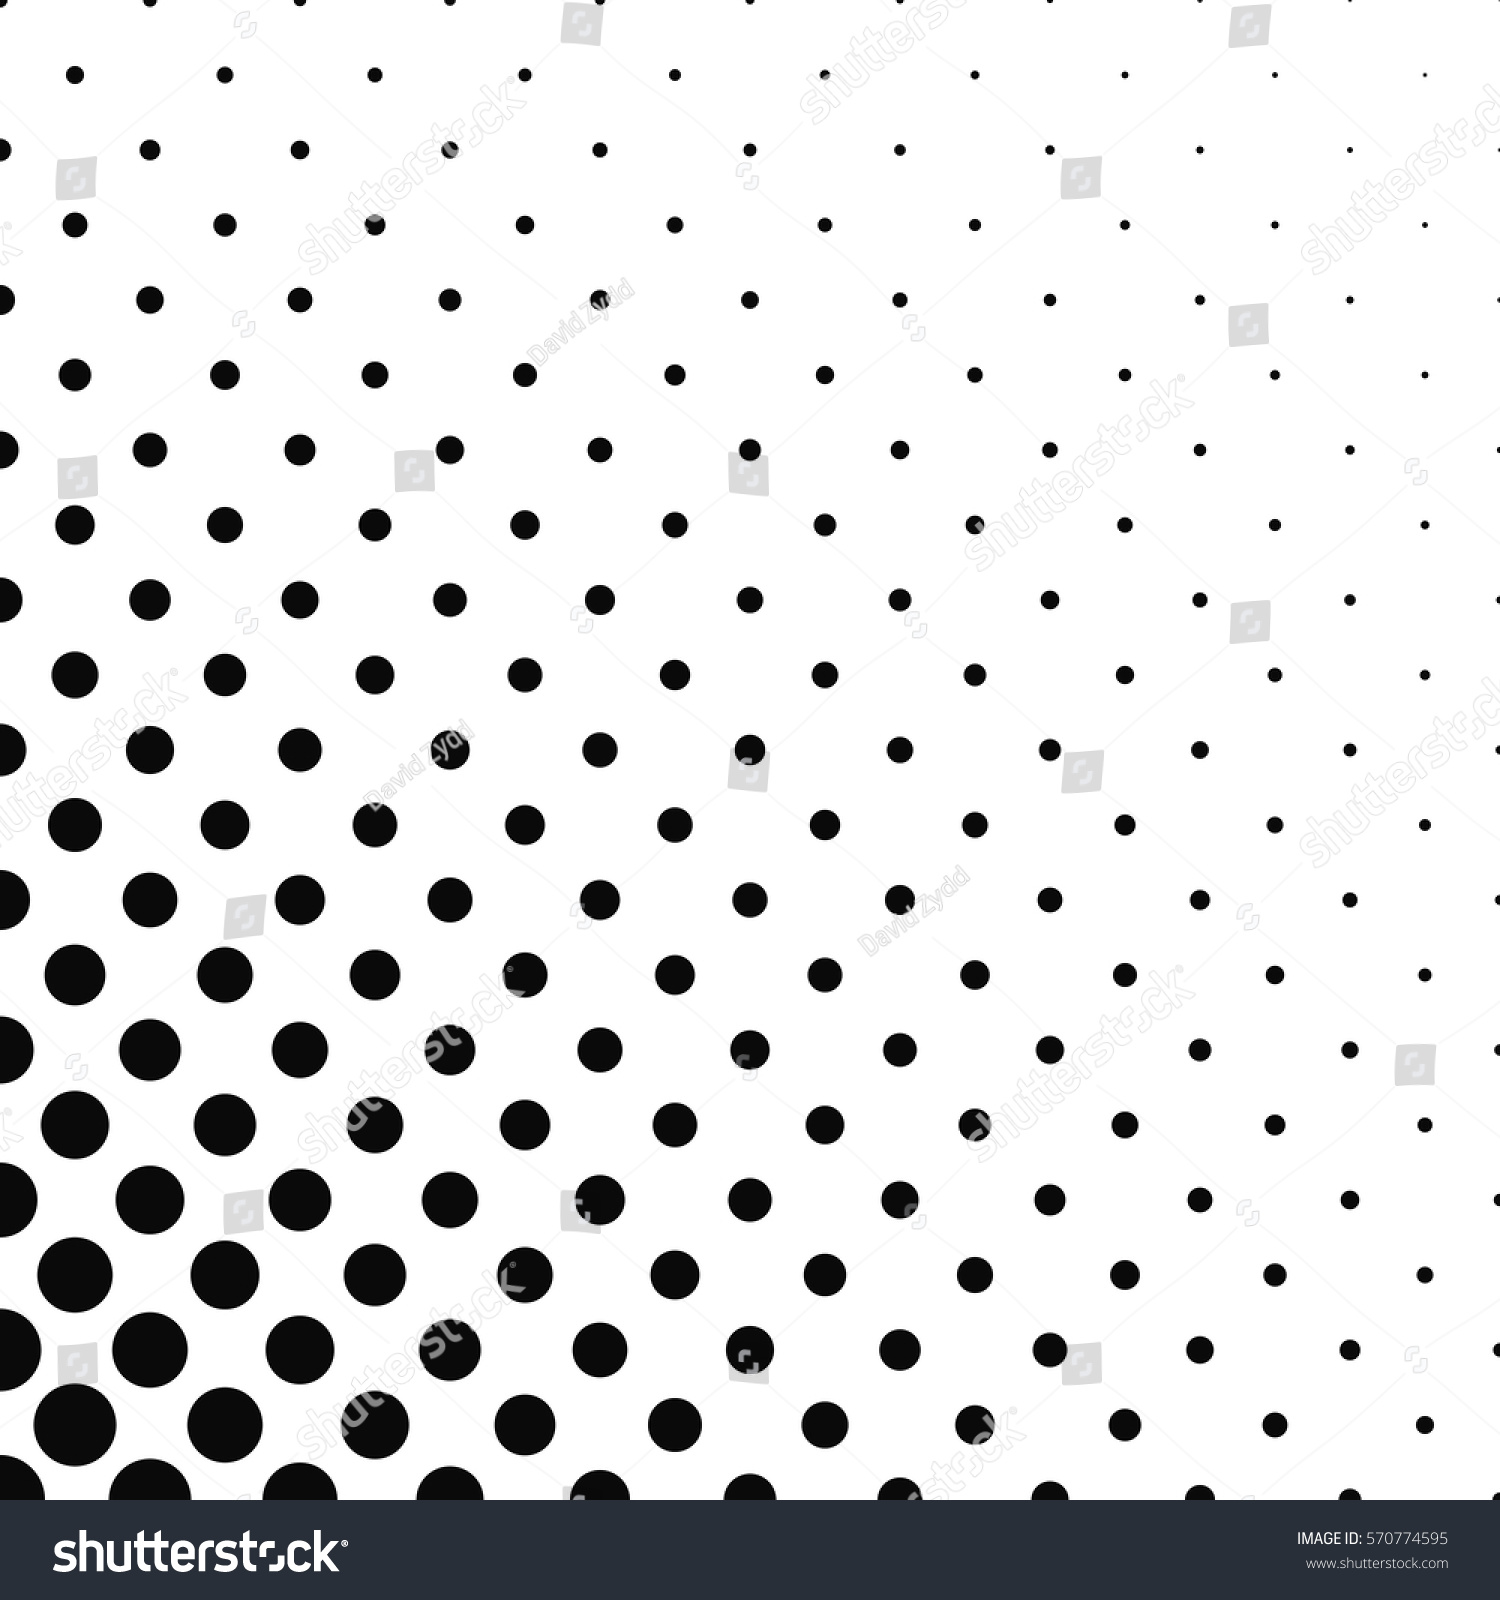 Abstract Monochrome Dot Pattern Background Design Stock Vector ...